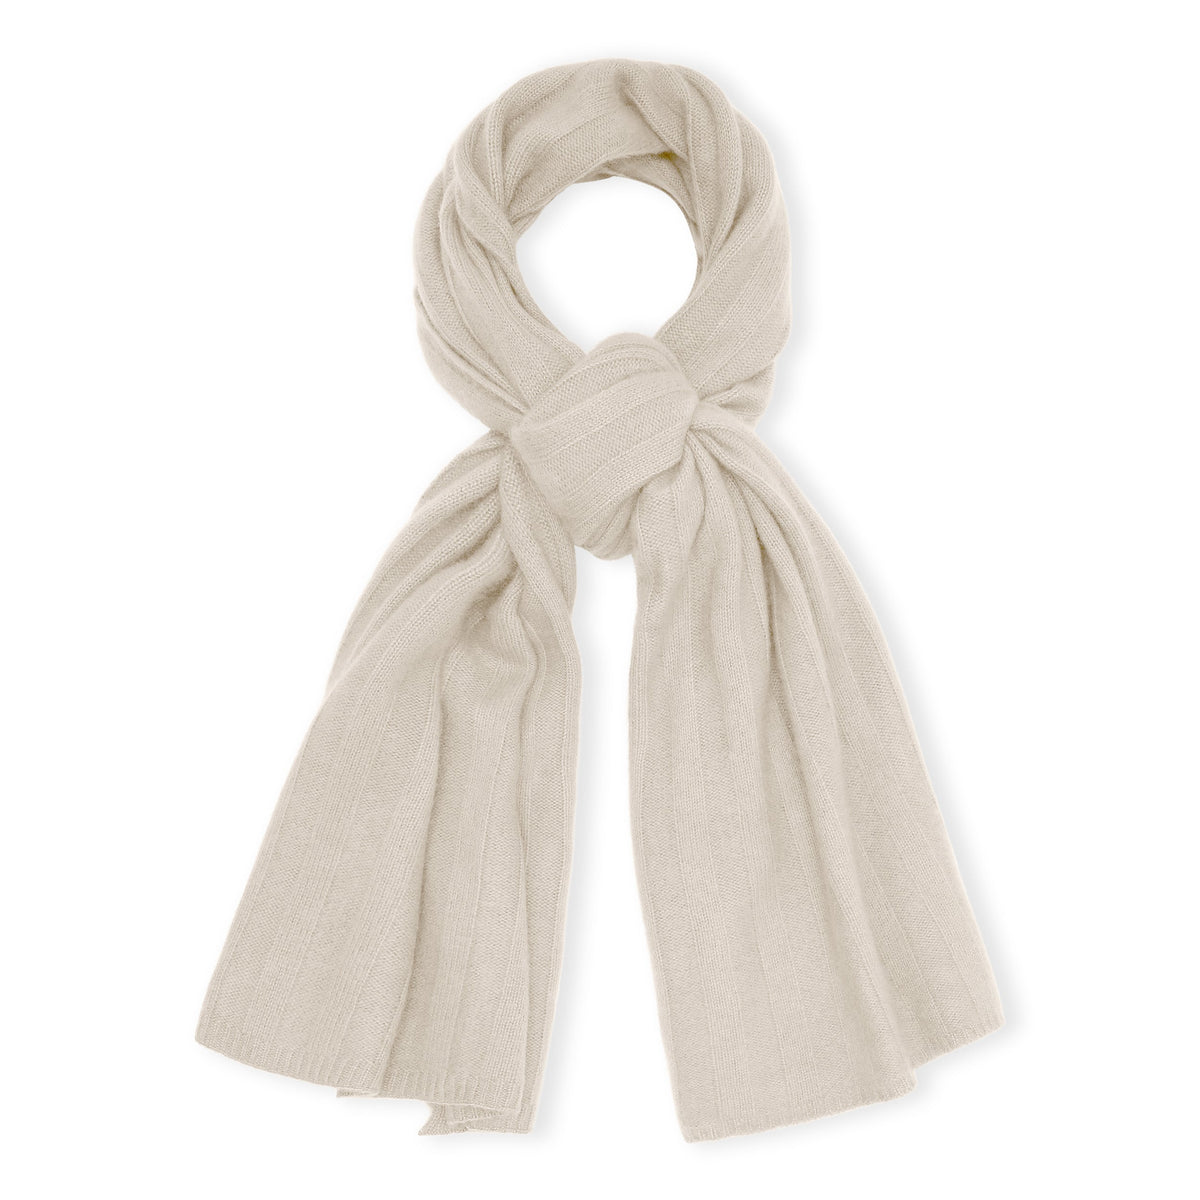 CARE BY ME Hannah 100% Cashmere Womens Scarf